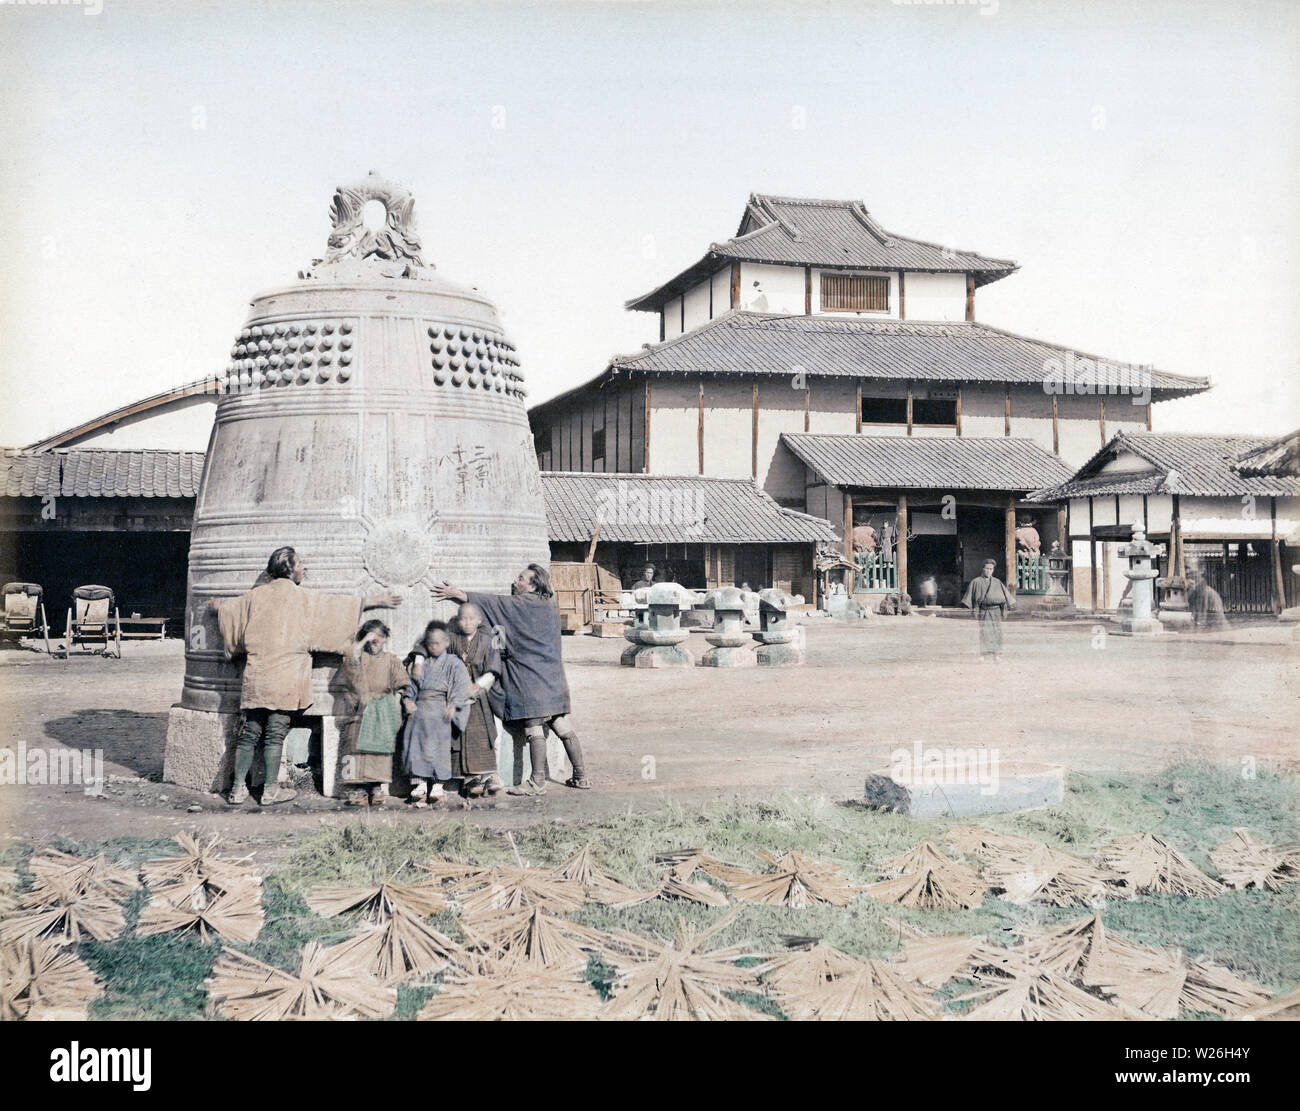 [ 1870s Japan - Chion-in Temple Bell, Kyoto ] —   Two men are stretching their arms around the bronze temple bell of Chion-in temple in Kyoto. Three children stand between them. Frames for sensu fans are drying in the foreground. In the background is Chion-in's Buddha Hall. It burnt down in 1973 (Showa 48).  The bell was cast in the early 17th century and was 4.5 meters high.  19th century vintage albumen photograph. Stock Photo